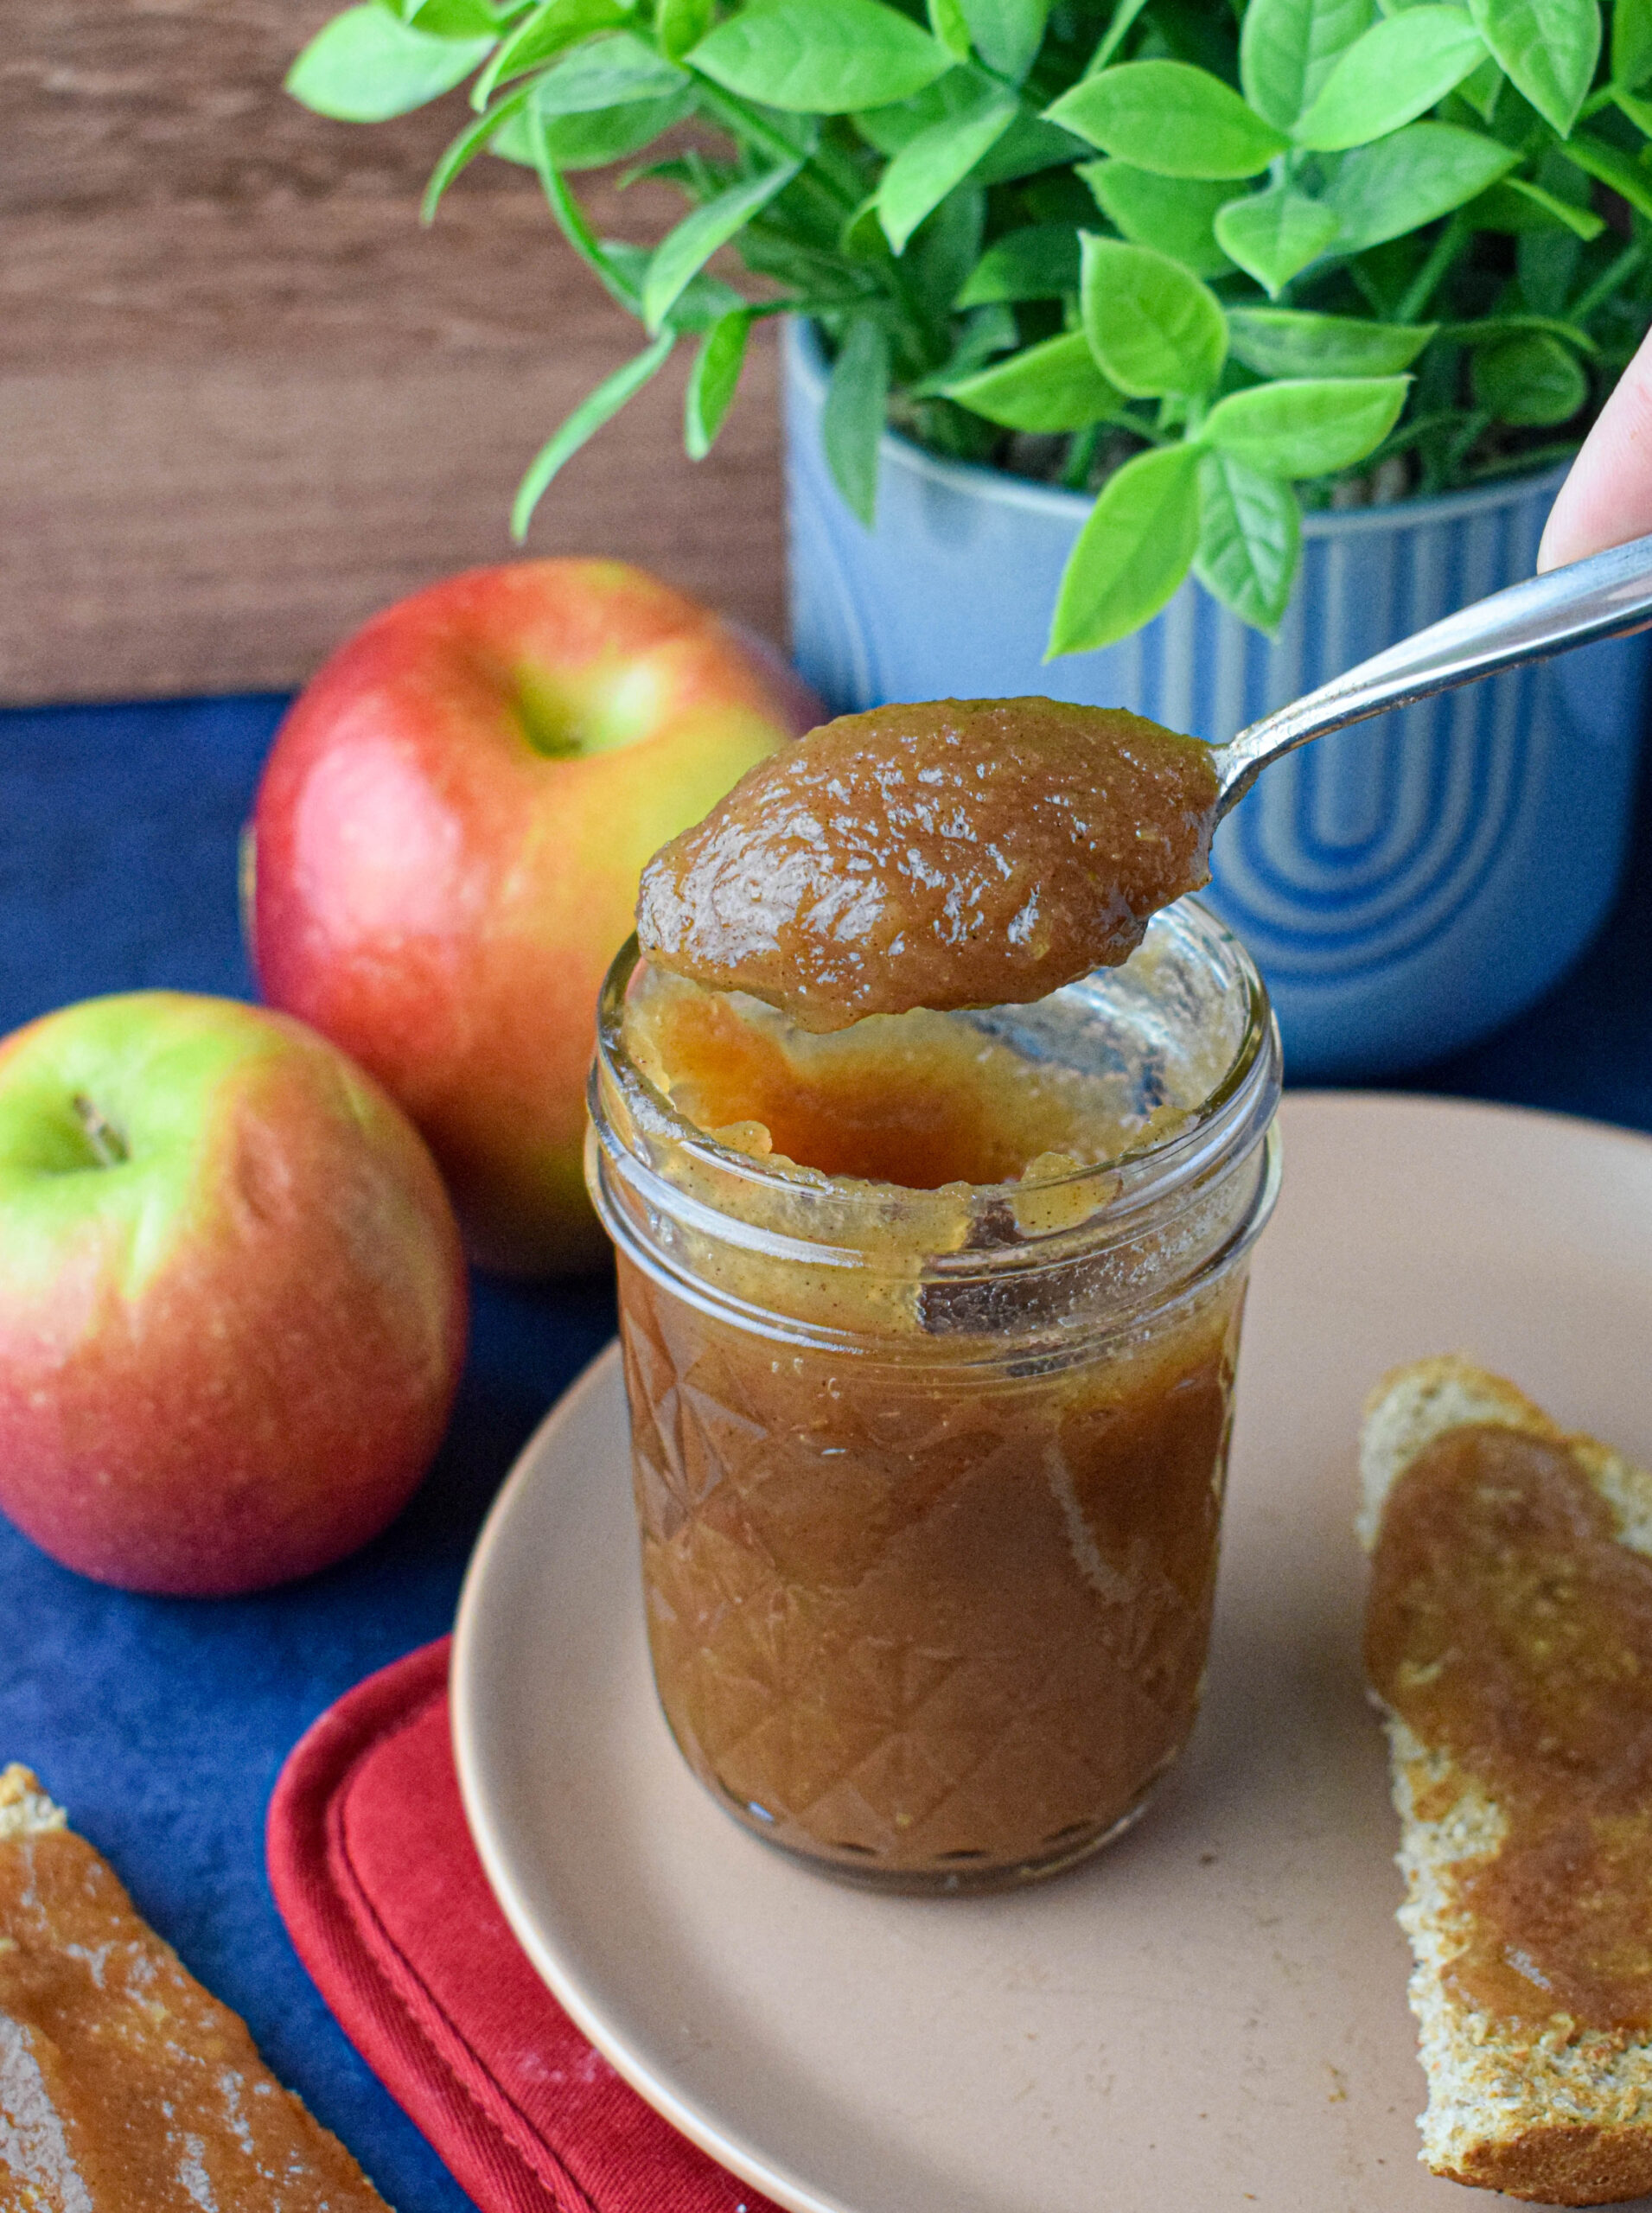 mason jar full of apple butter next to apples and toast with apple butter spread on it 